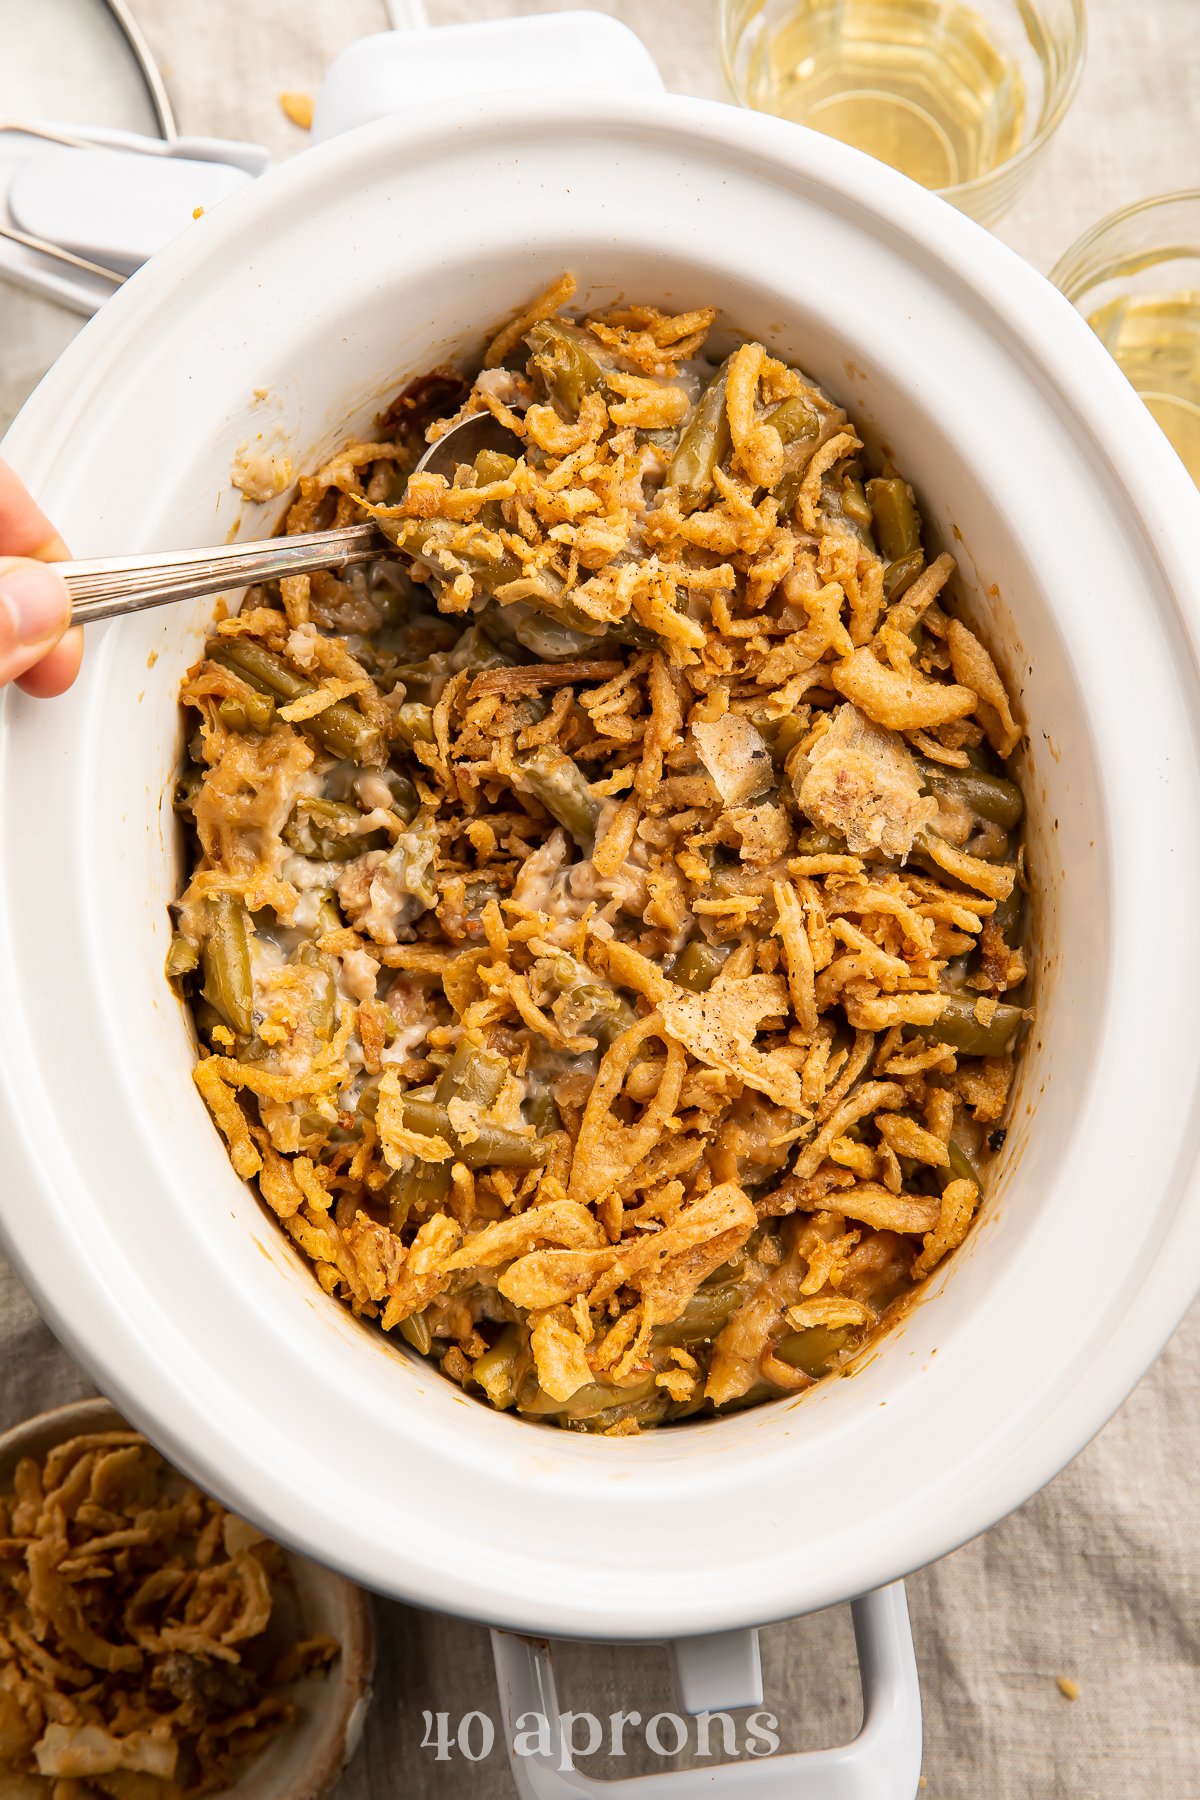 Overhead view of a woman's hand lifting a spoonful of casserole out of a white oval Crockpot containing a green bean casserole topped with crispy fried onions on a neutral tabletop.